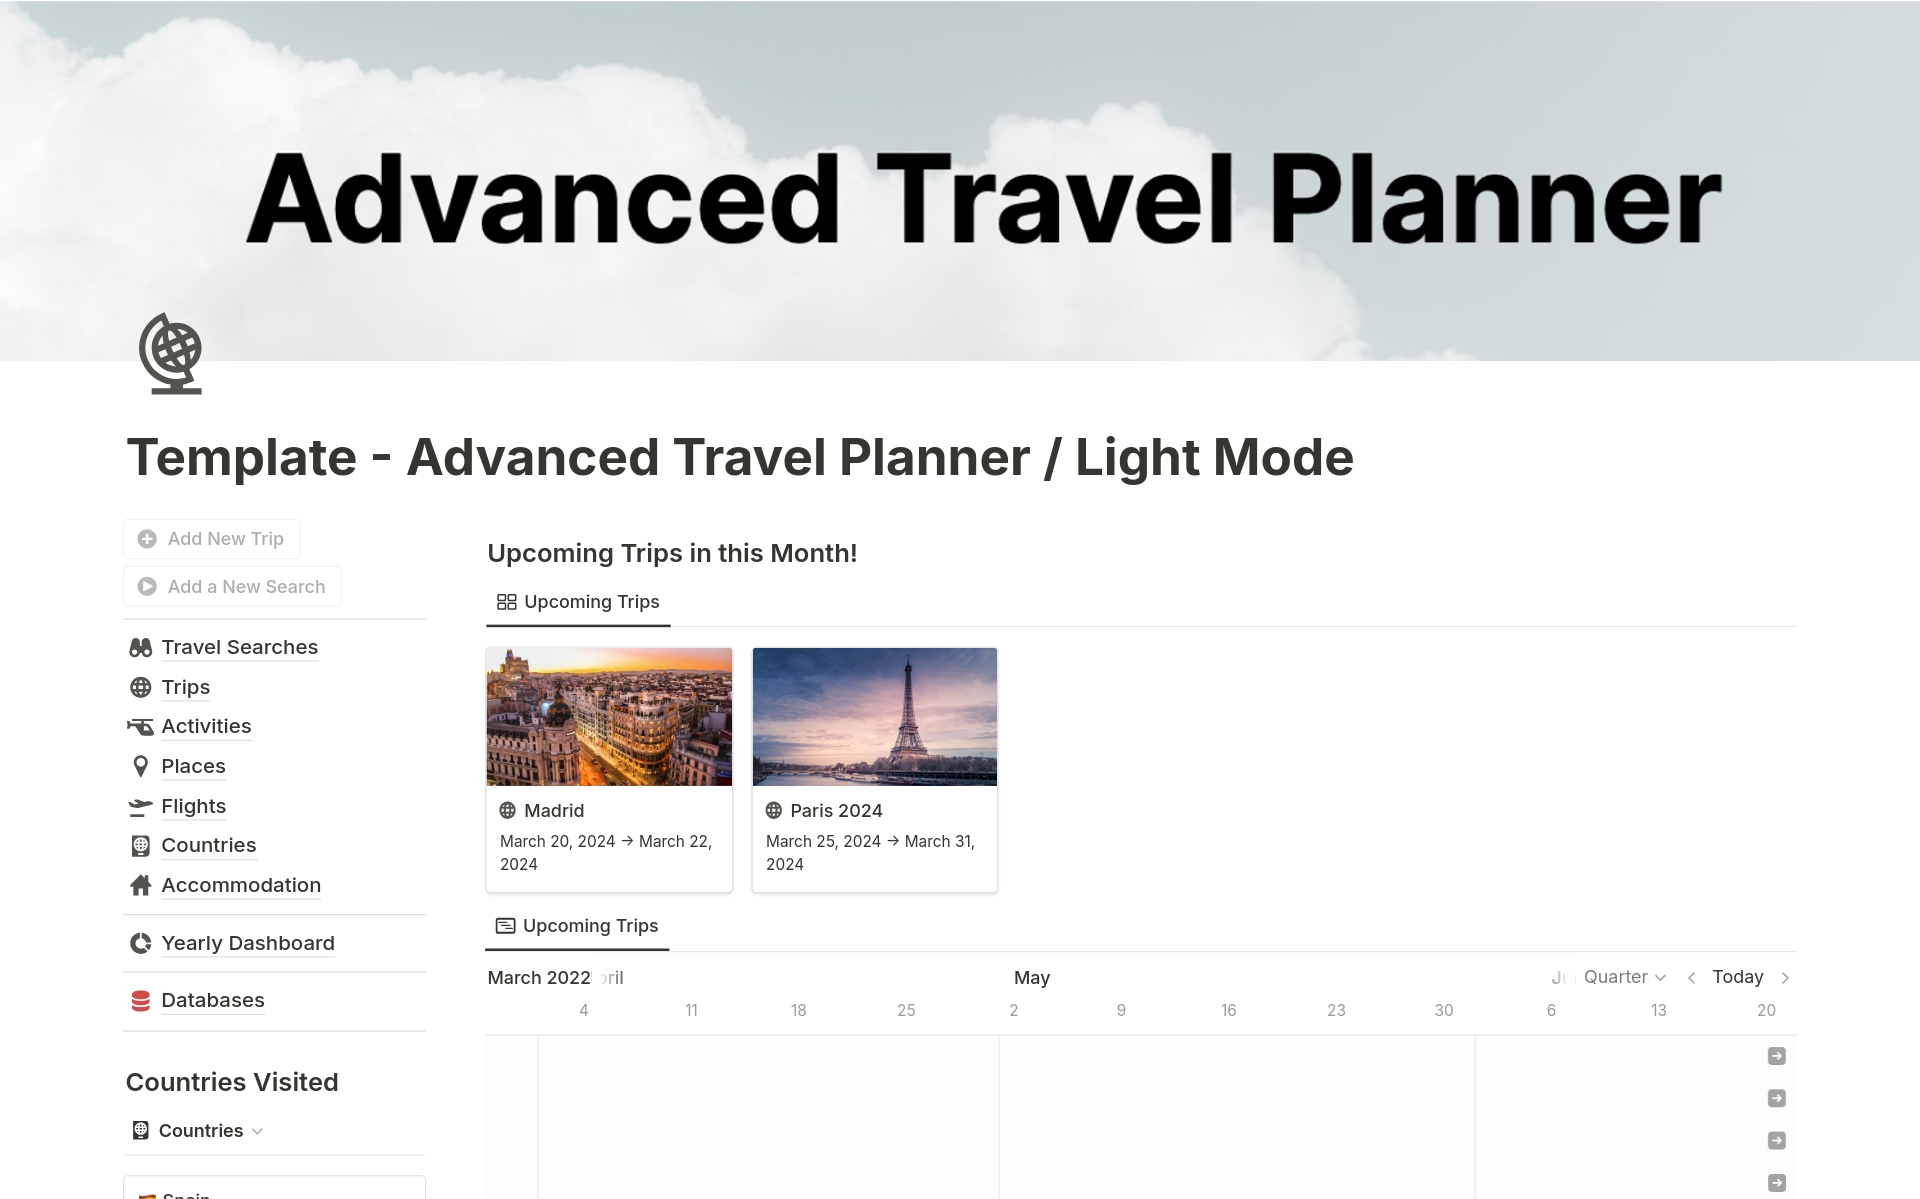 Completely for Free! Discover "Advanced Travel Planner" on Notion: Plan and track your travels effortlessly. Includes Travel Searcher, Expense Management, and Reporting. Choose Light or Dark Mode for comfort.